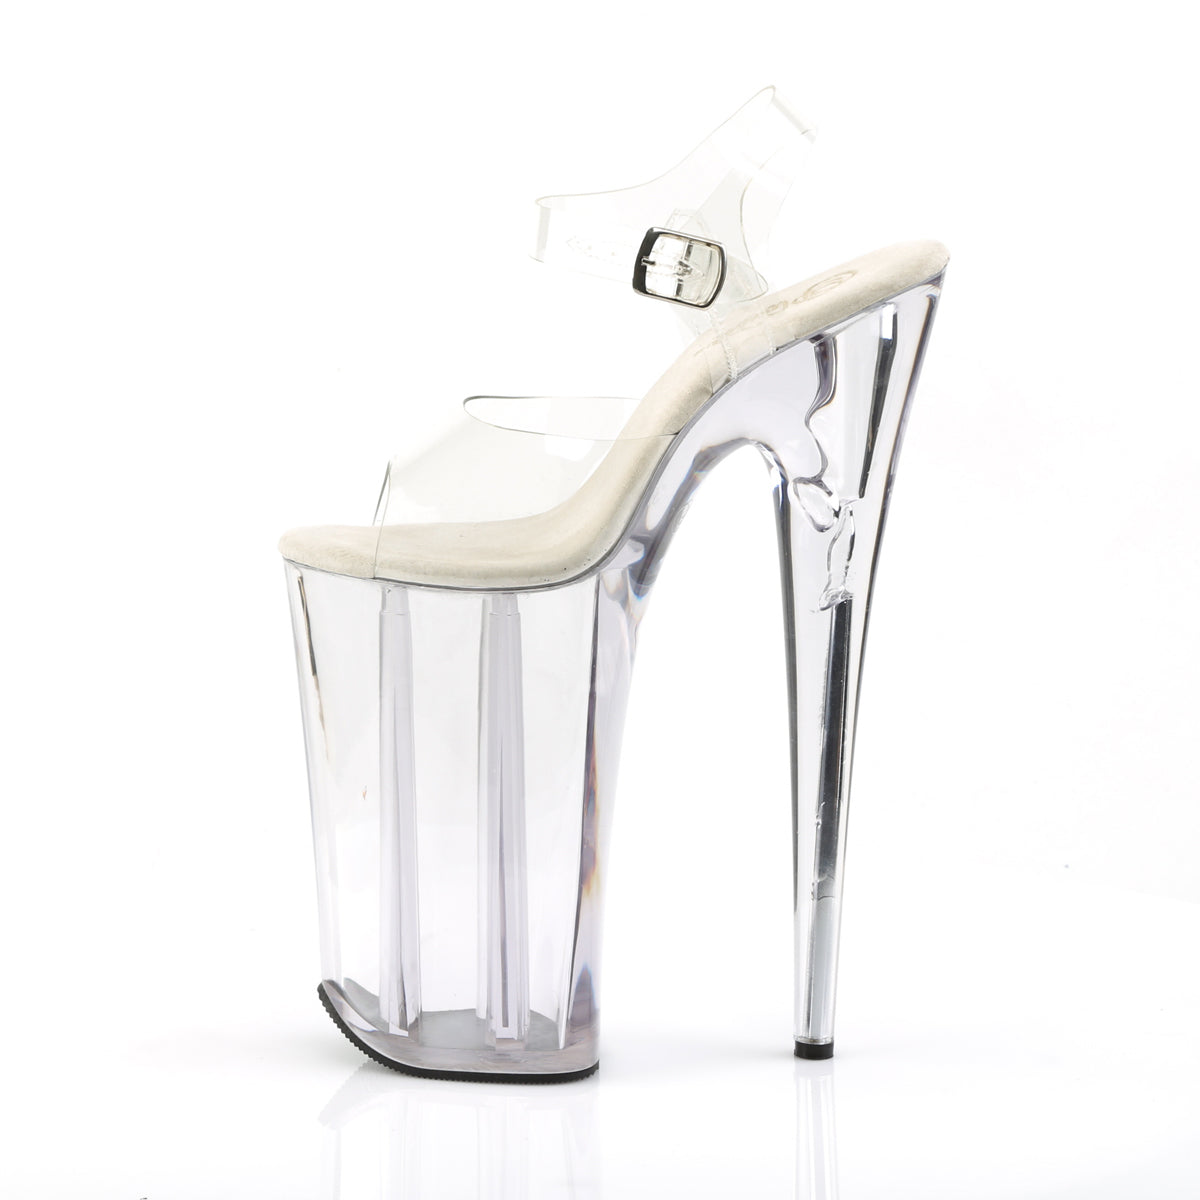 BEYOND-008 Sexy 10" Heel Clear Pole Dancing Platforms-Pleaser- Sexy Shoes Pole Dance Heels